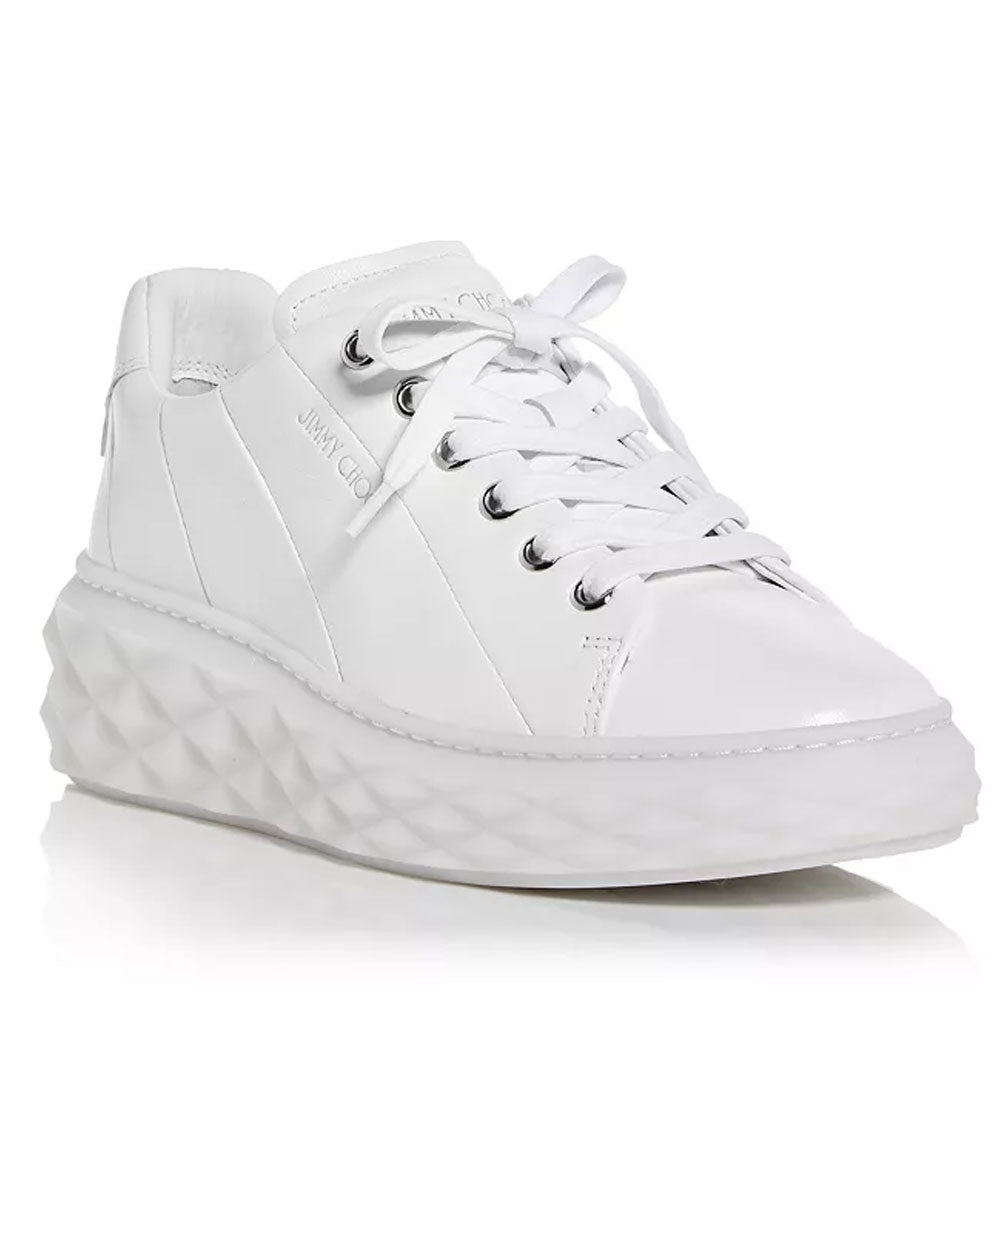 DIAMOND LIGHT MAXI/F  White Nappa Leather Low-Top Trainers with